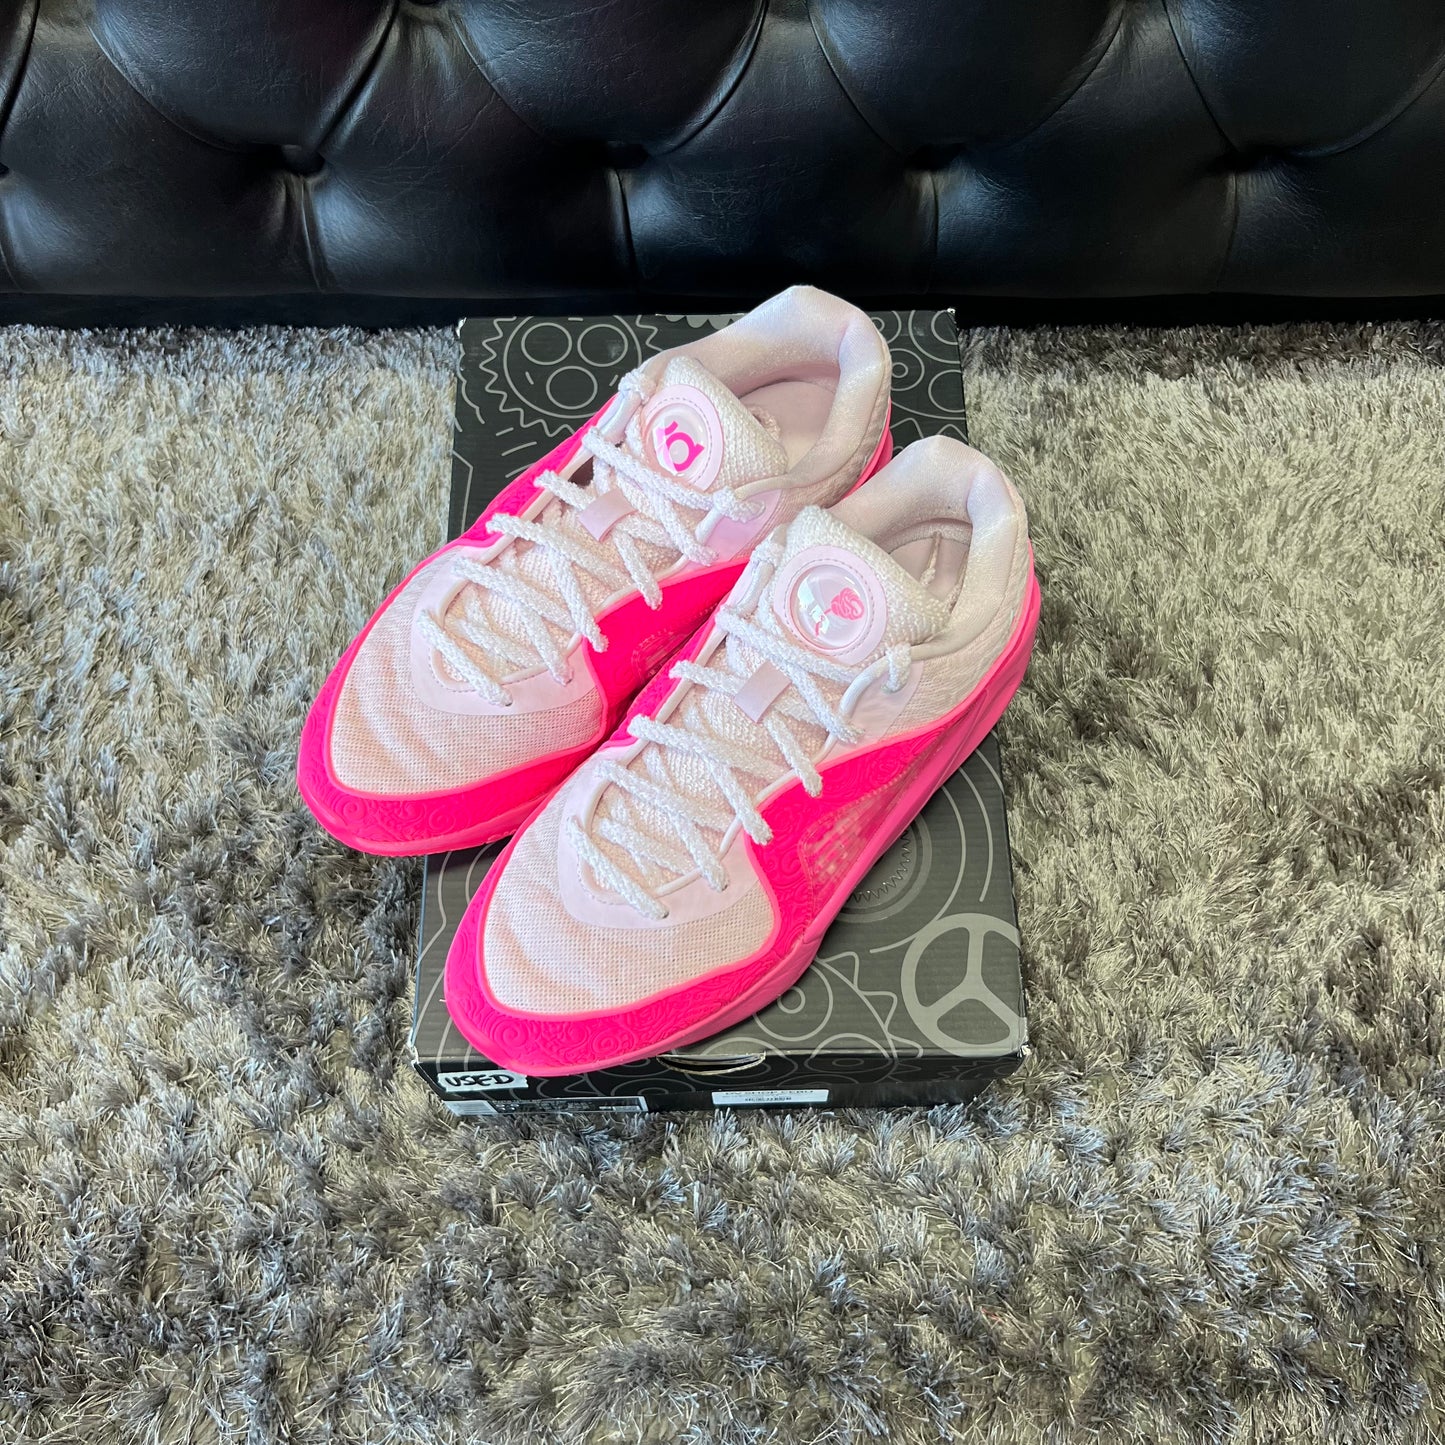 KD16 Aunt Pearl size 9.5 used